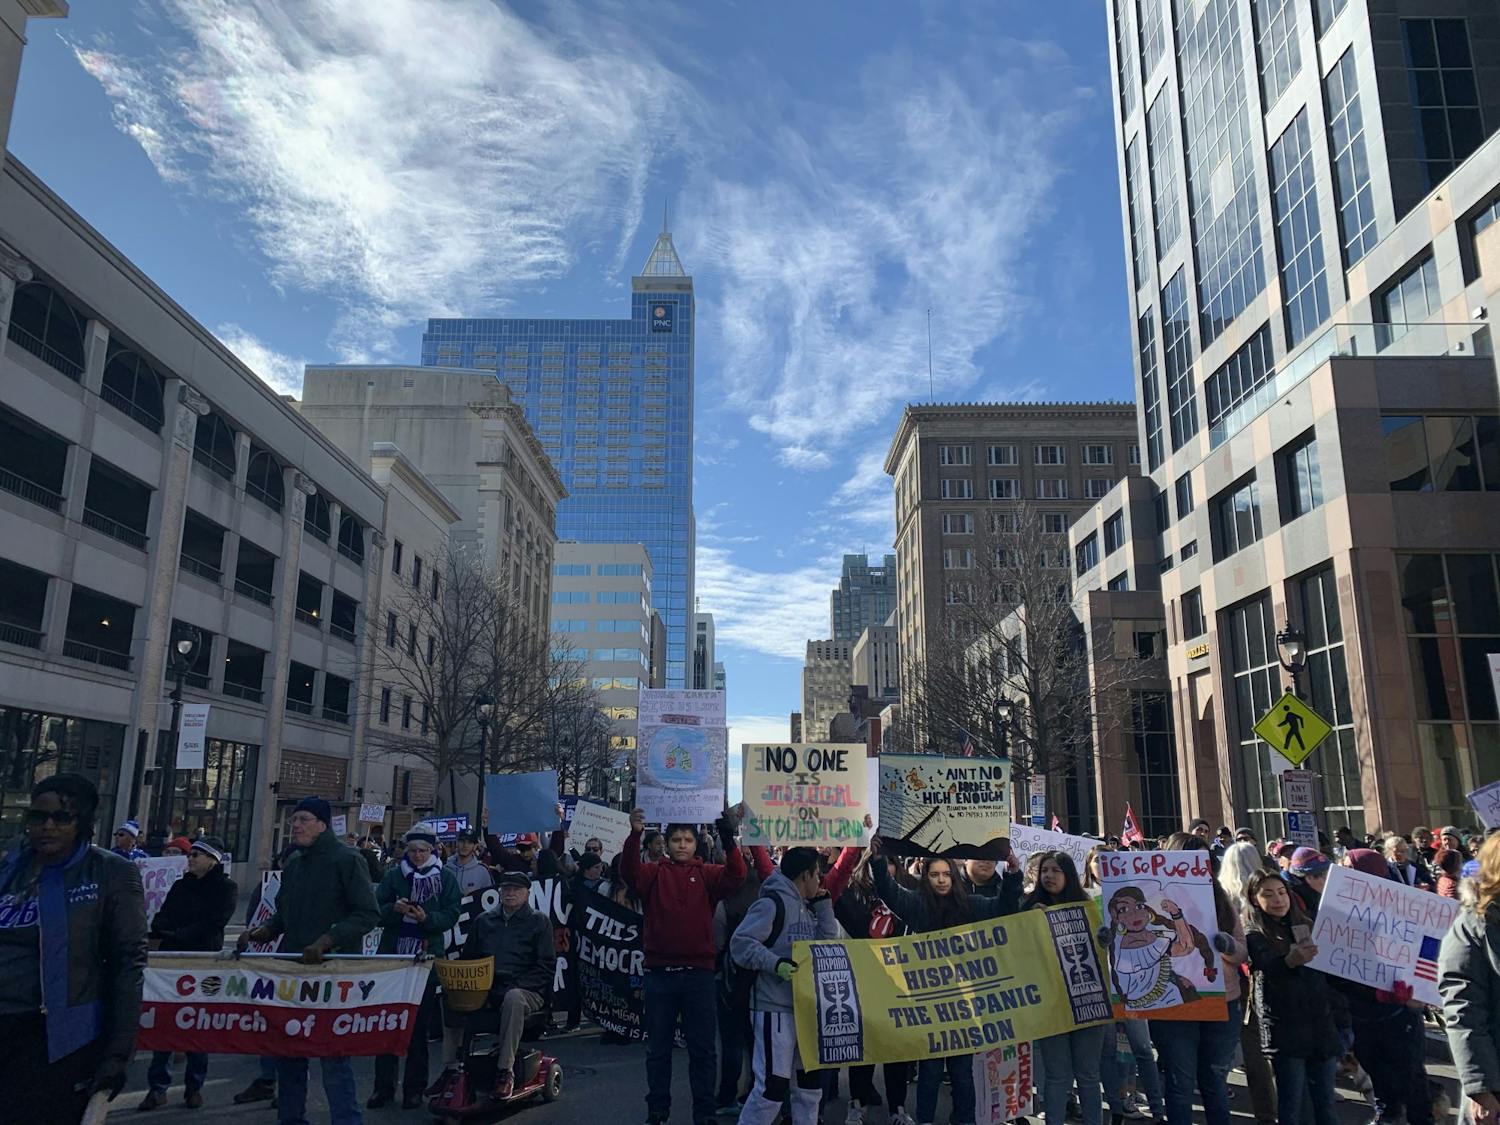 Thousands gathered and marched to the &nbsp;State Capitol Building at the NAACP-sponsored "Historic Thousands on Jones Street" march in downtown Raleigh on Saturday, Feb. 8, 2020.&nbsp;